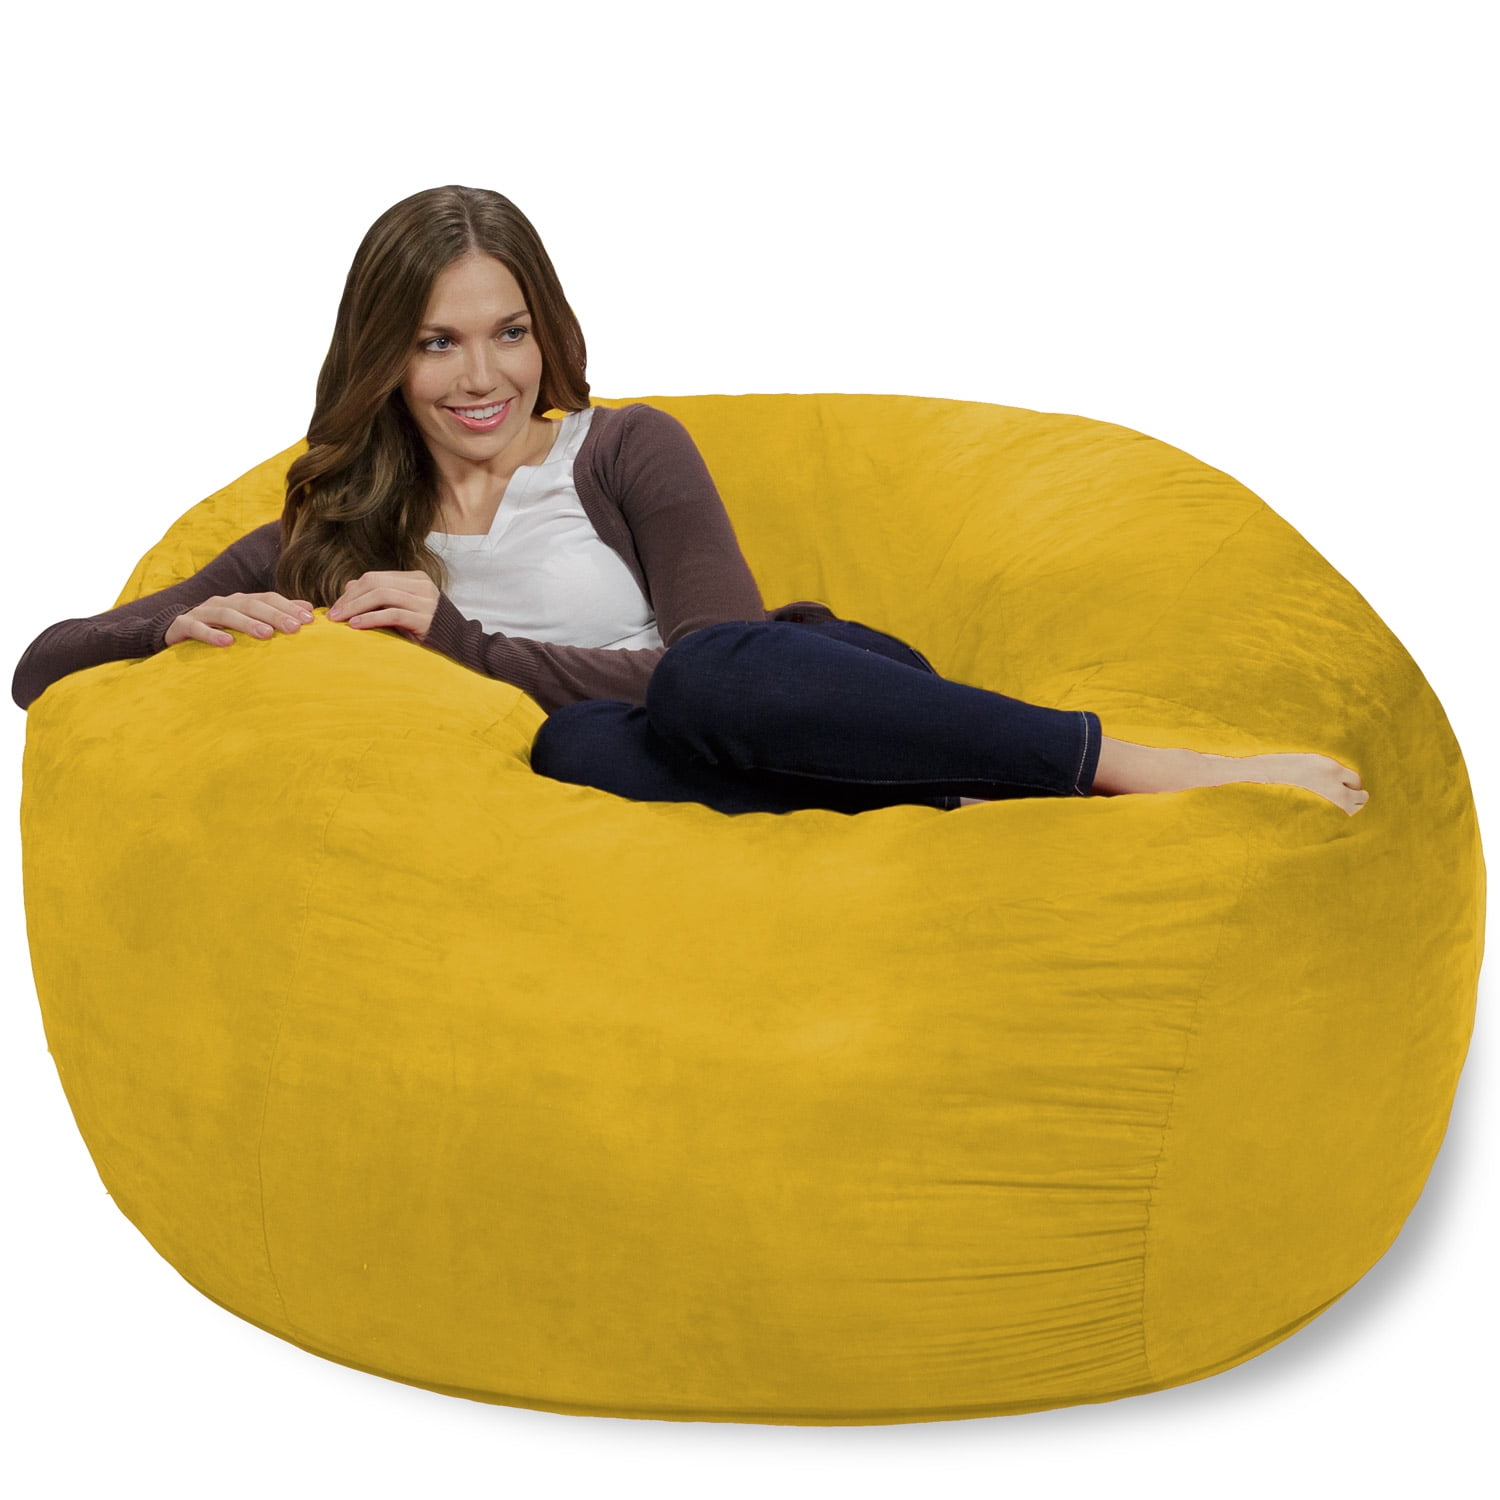 Ultimate Sack 5000 (5 ft.) Bean Bag Chair in Multiple Colors: Giant Foam-Filled Furniture